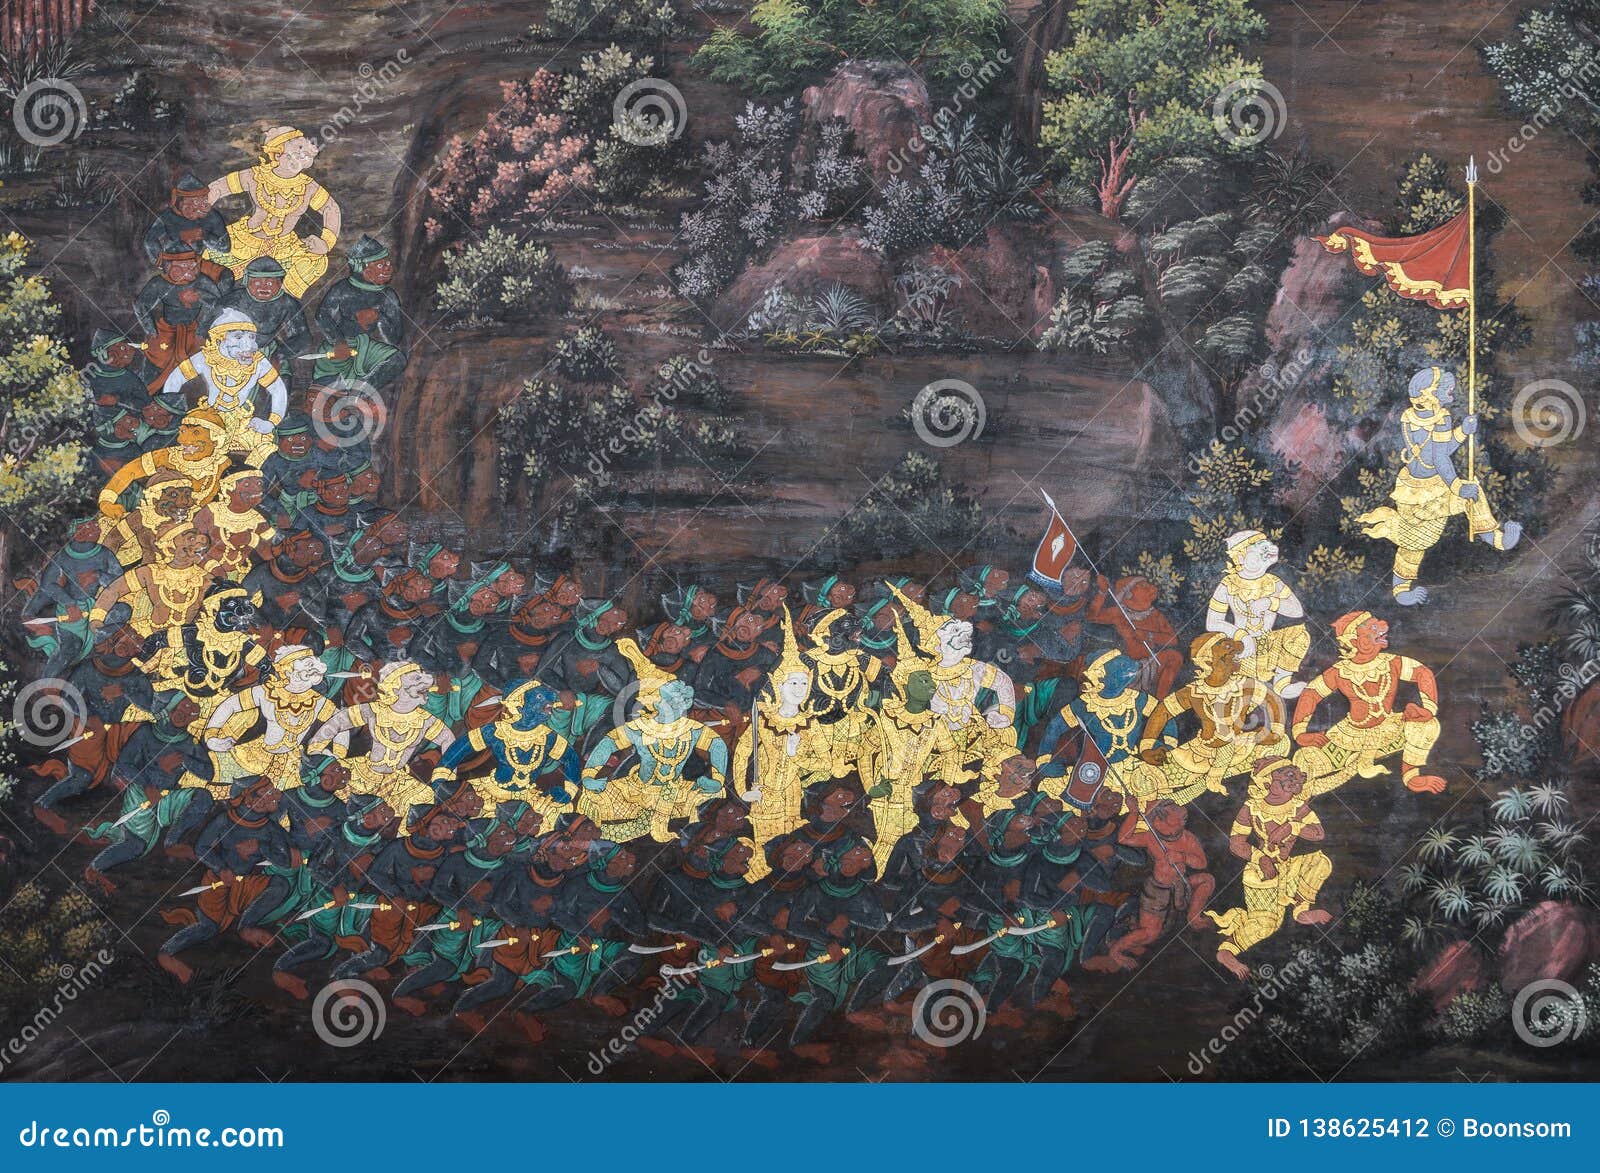 traditional thai paintings of ramayana epic